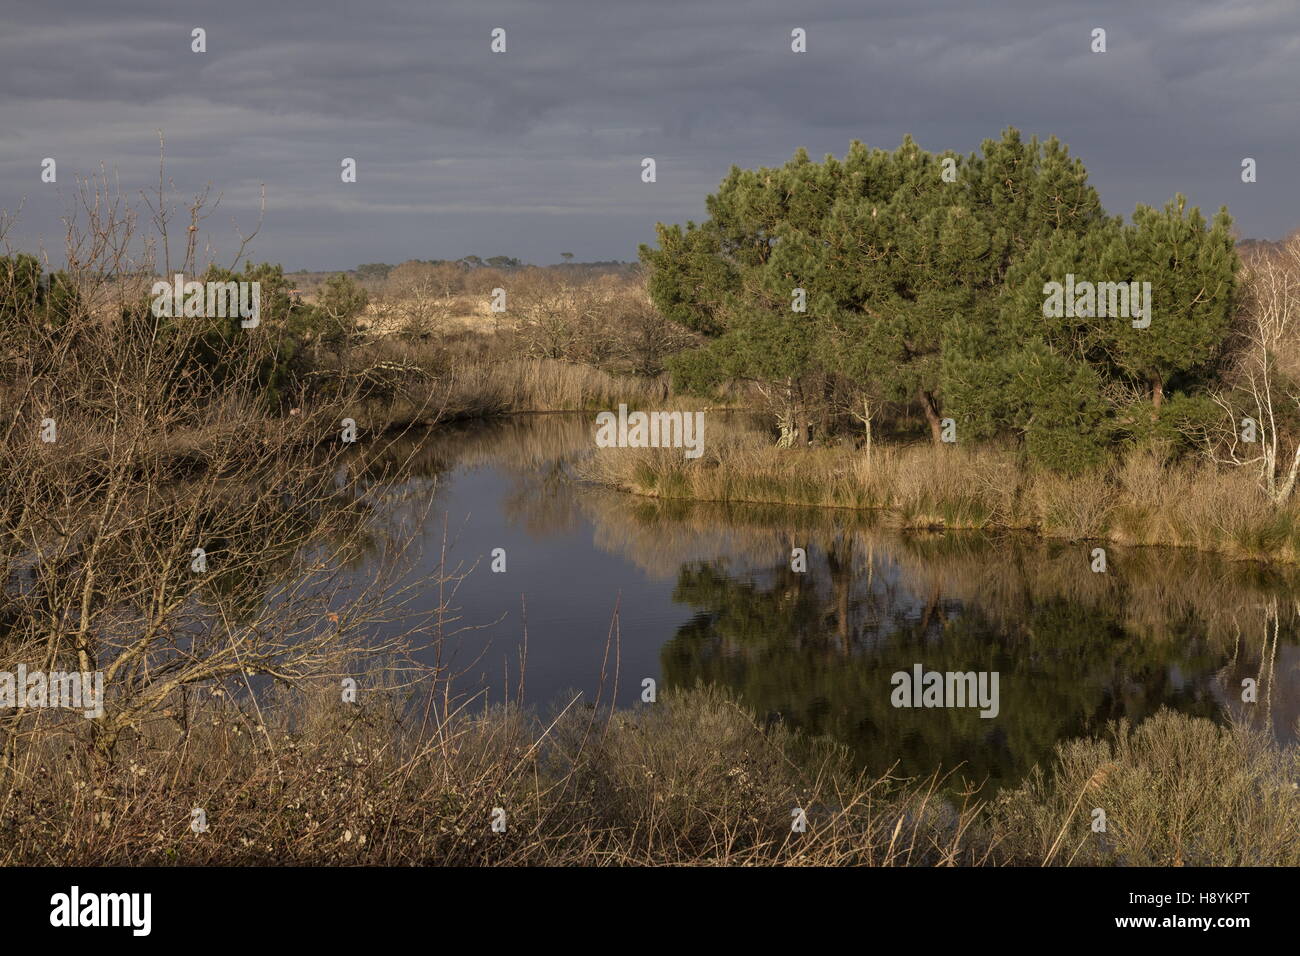 Mixed coastal habitats in the réserve ornithologique du Teich (parc ornithologique du Teich), south-west France. Late winter. Stock Photo